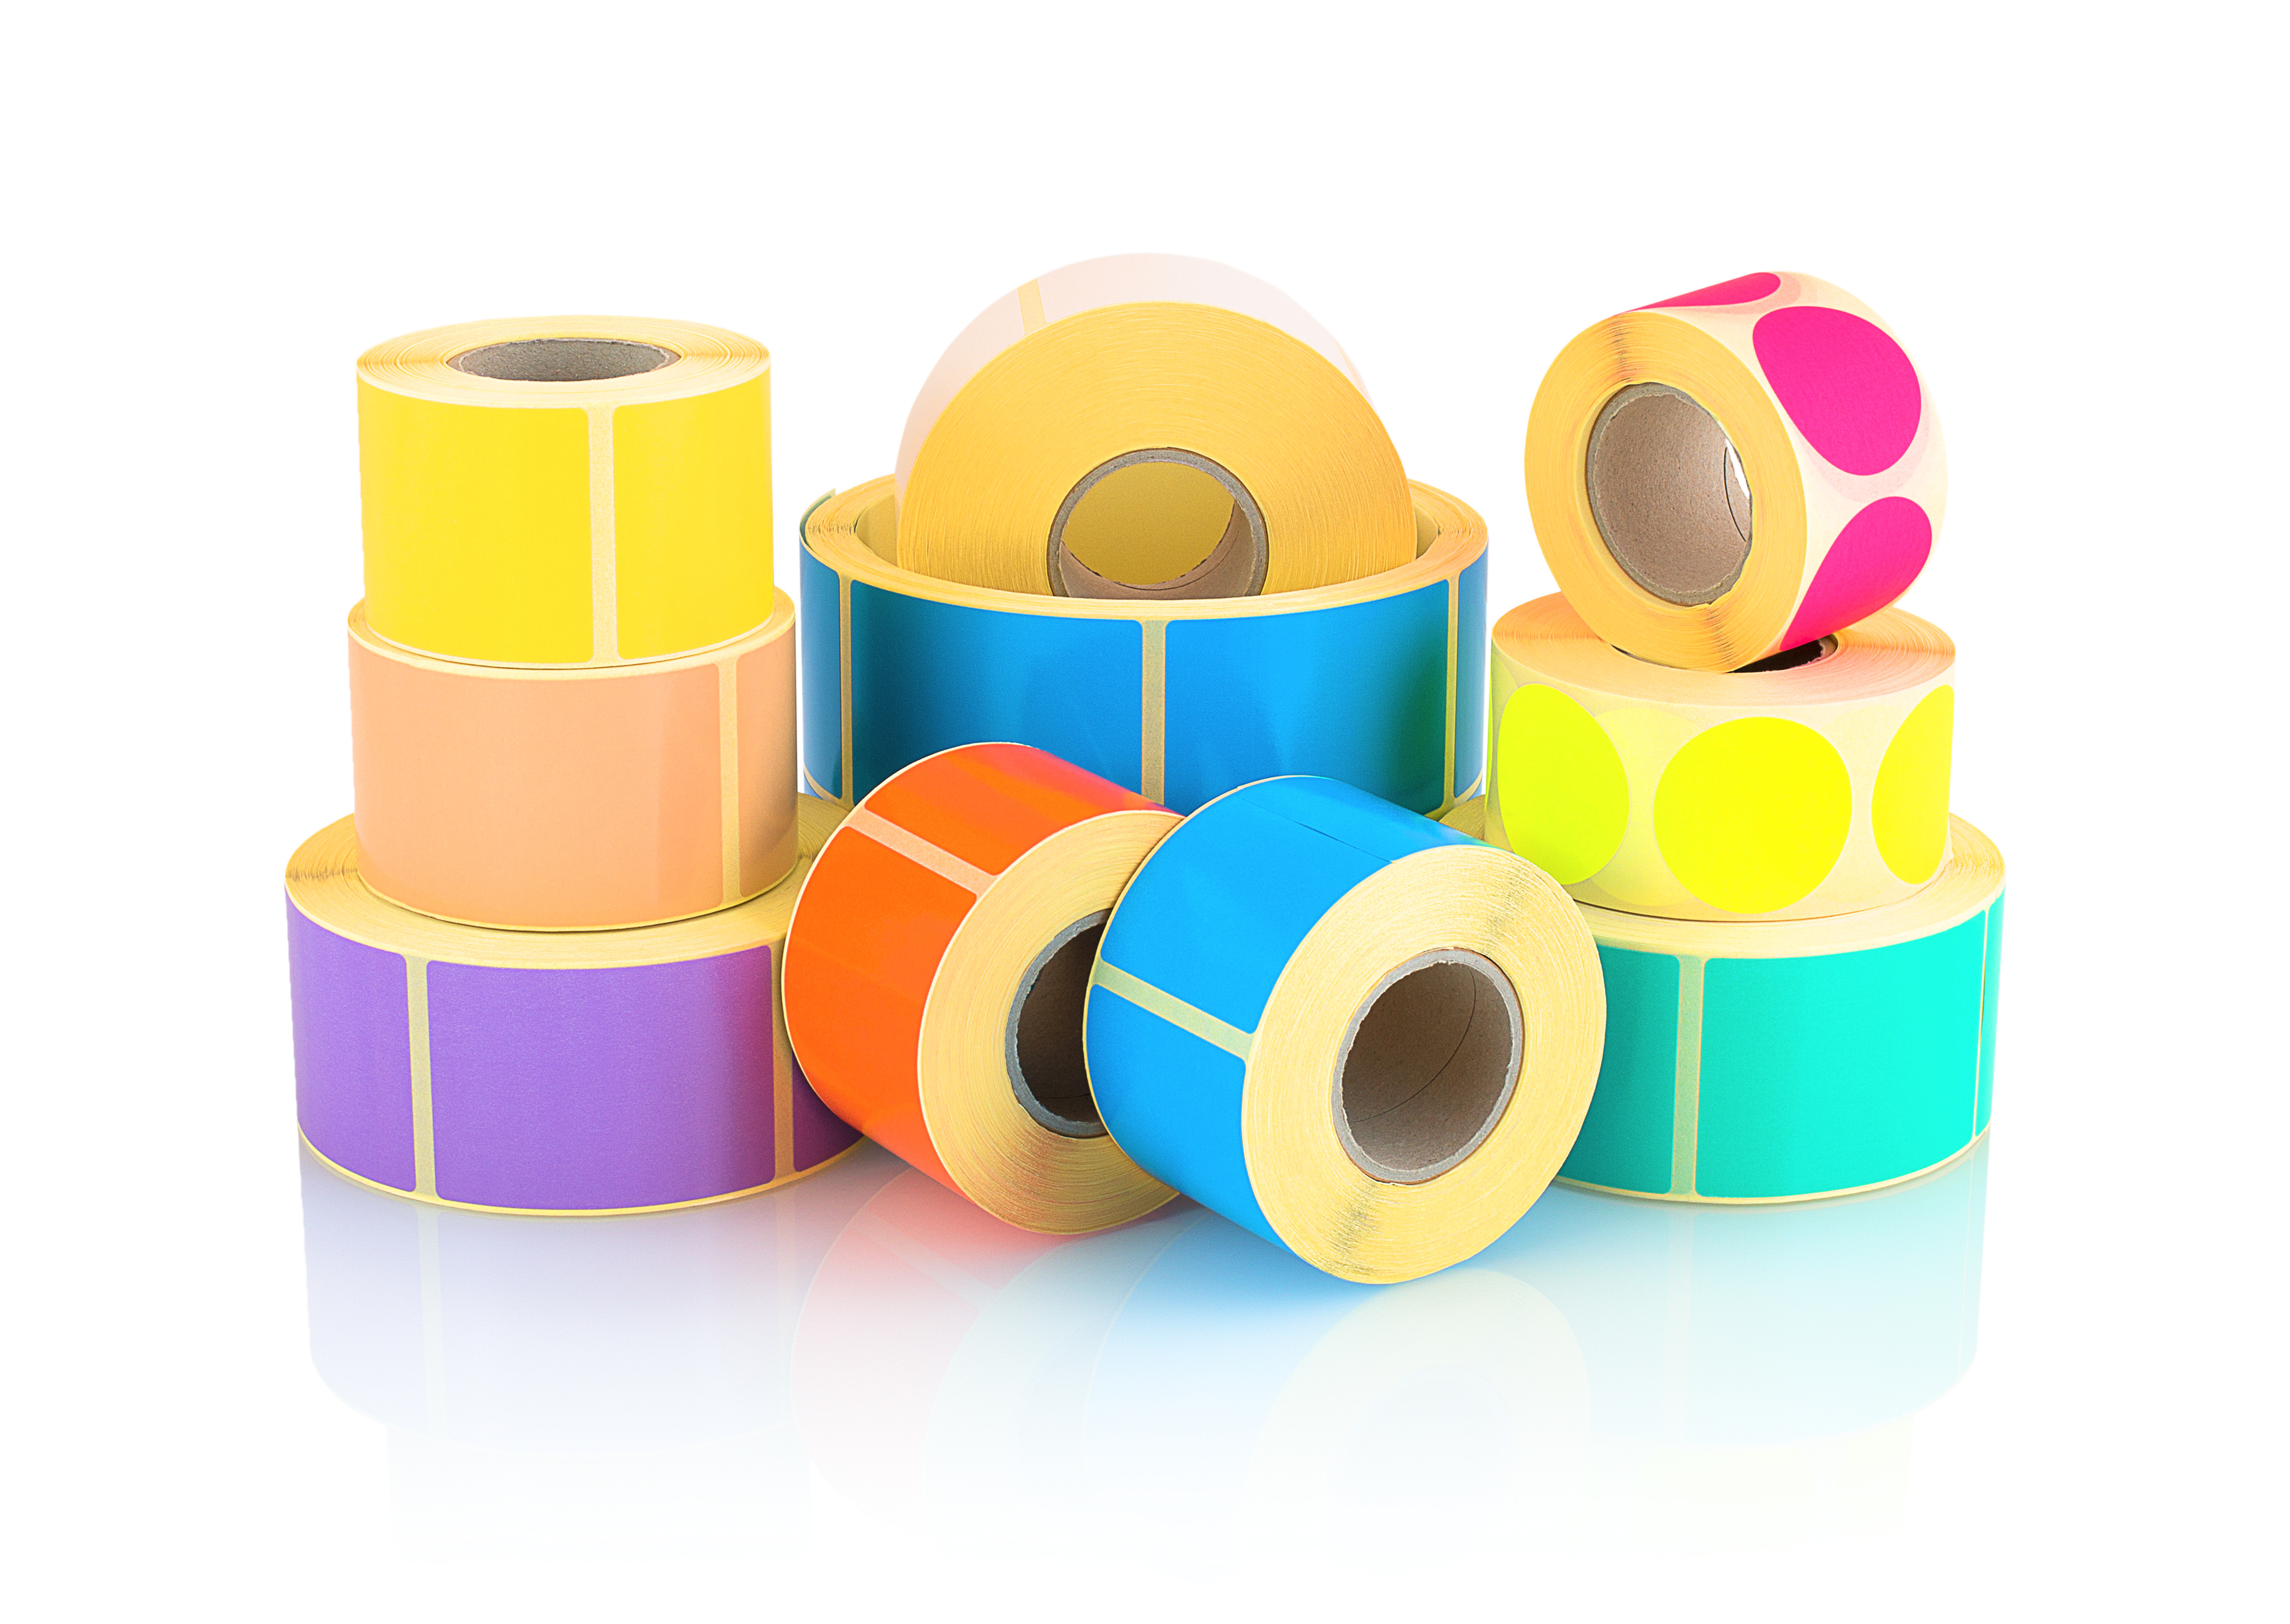 A photo of several stacks of rolls of printable adhesive labels.